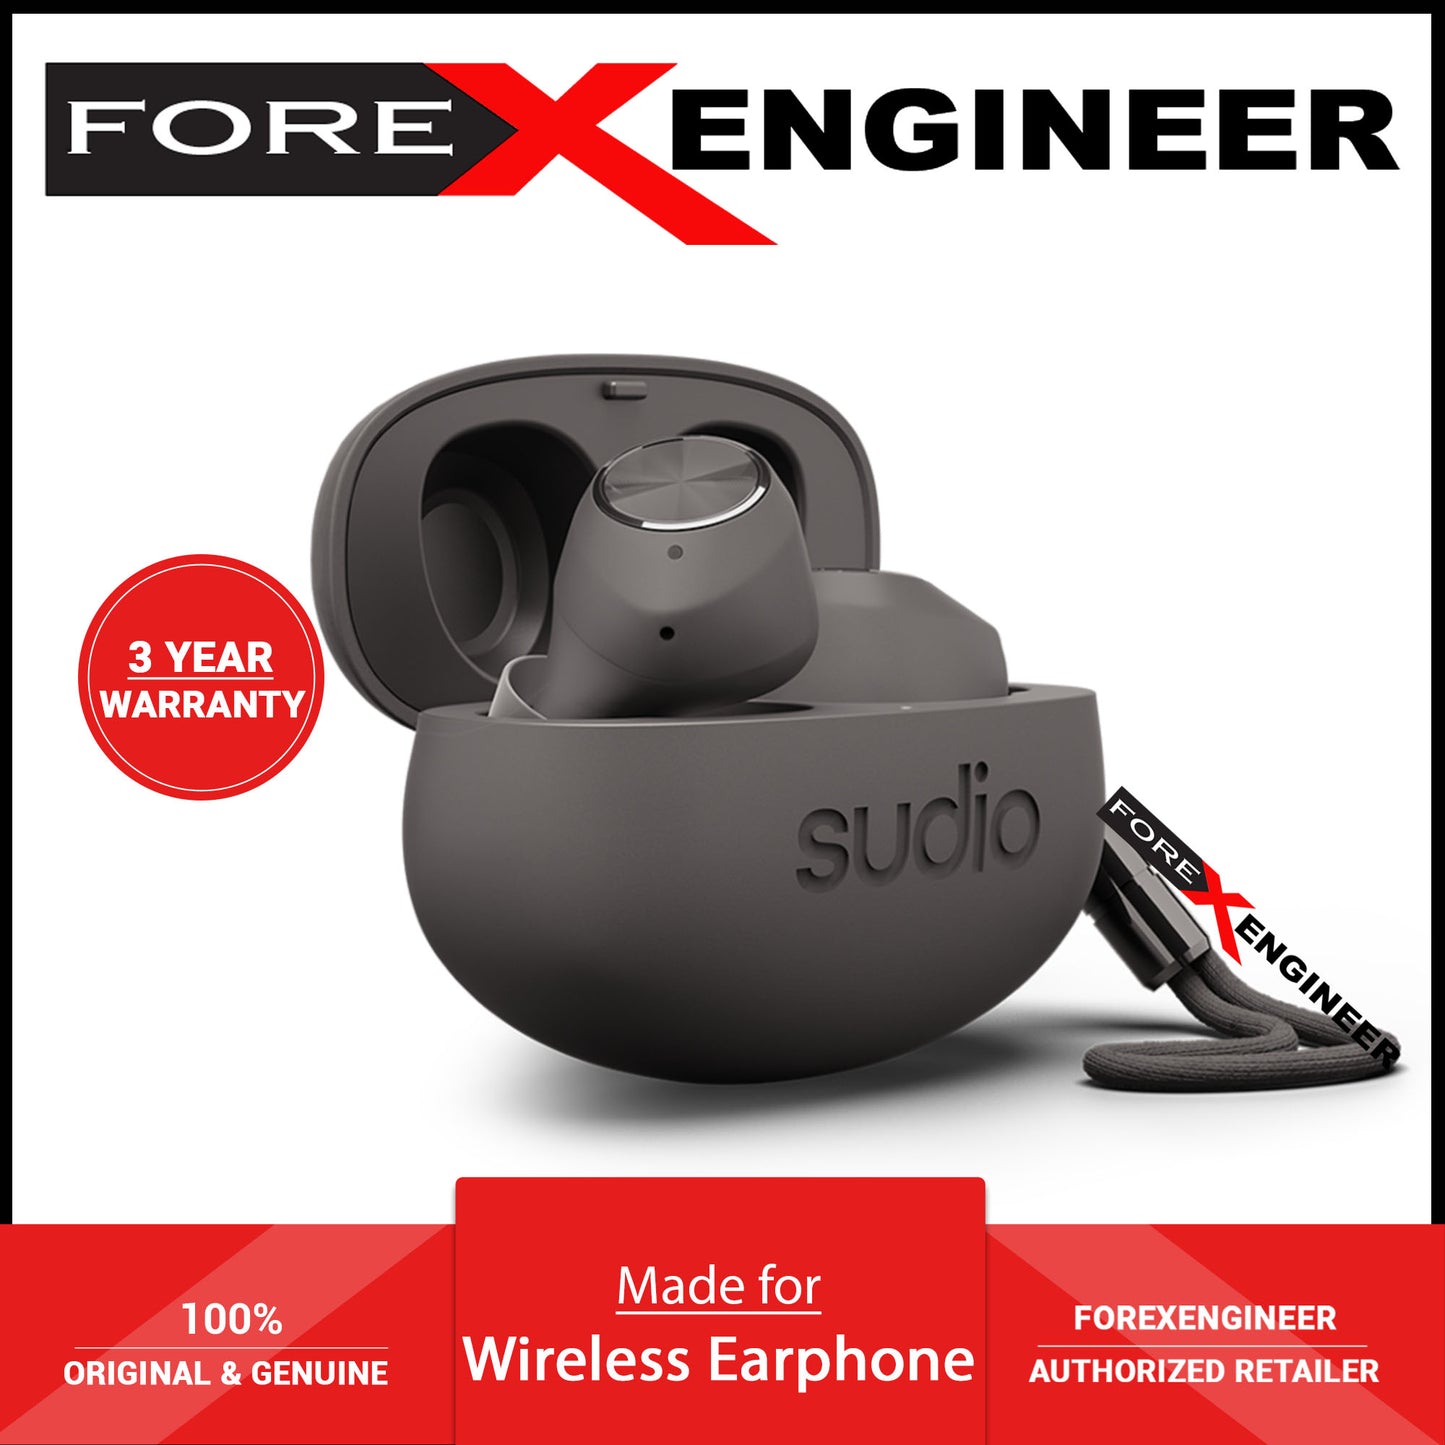 Sudio Wireless Earphone T2 Active Noise Cancellation & Clear Dynamic Sound - Black (Barcode: 7350071380956 )